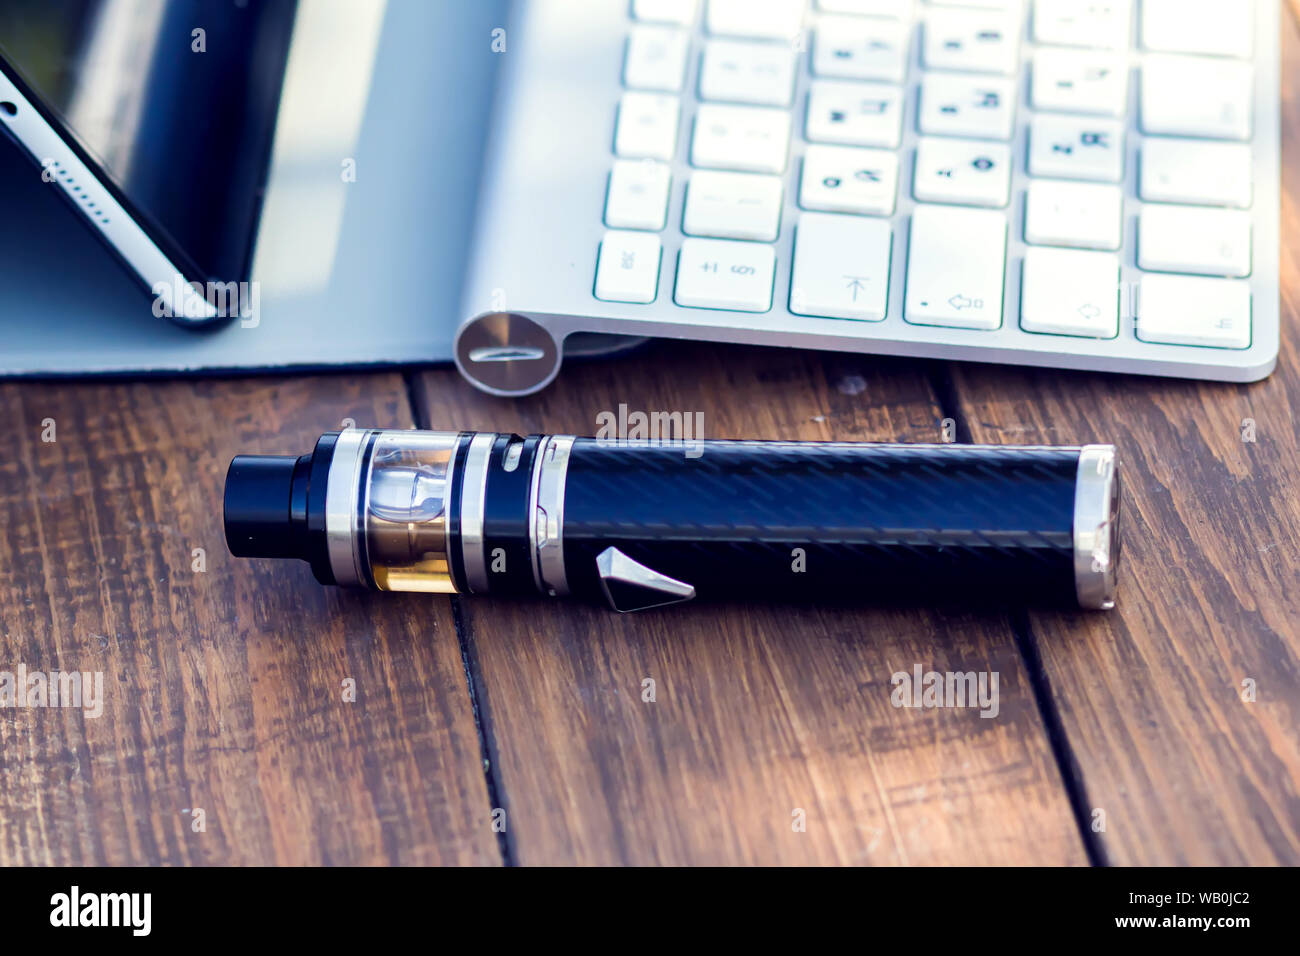 A vaporizer and laptop are on the wooden table. Smoke devise. Lifestyle concept Stock Photo